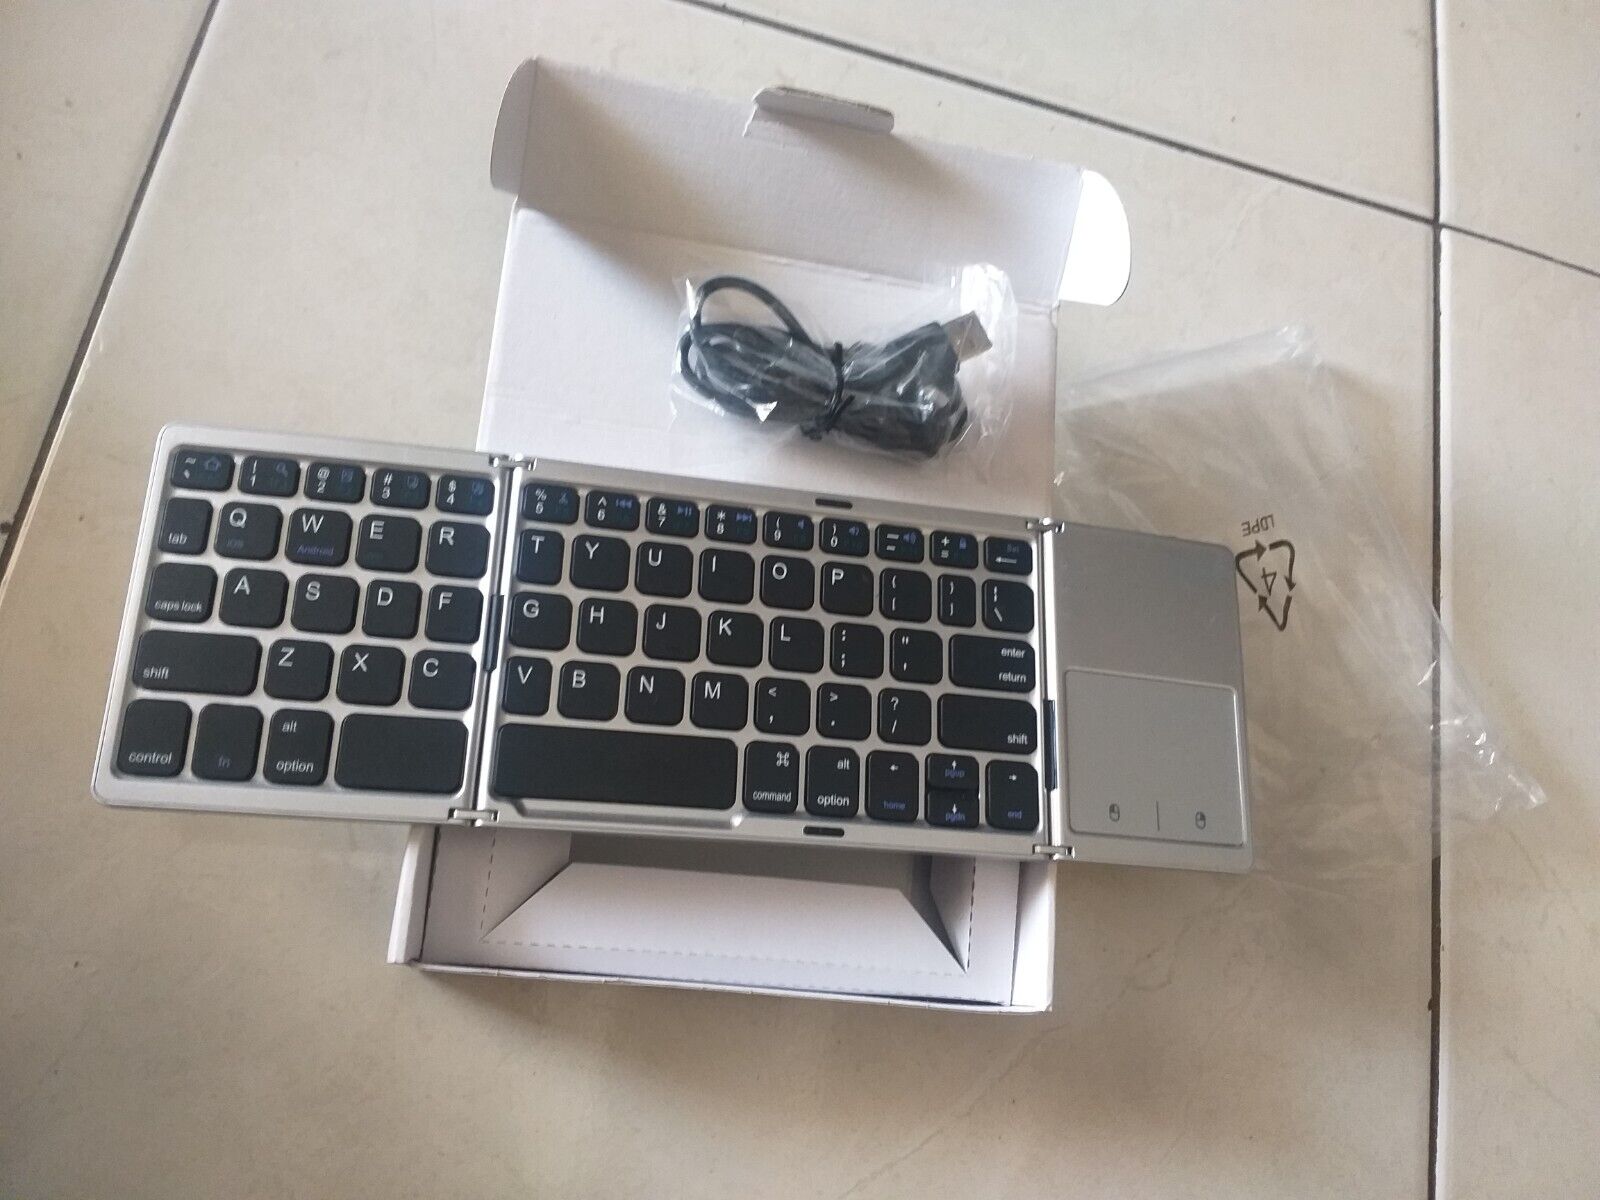 Foldable Bluetooth Keyboard Compatible with iPad, iPhones, Android, Windows